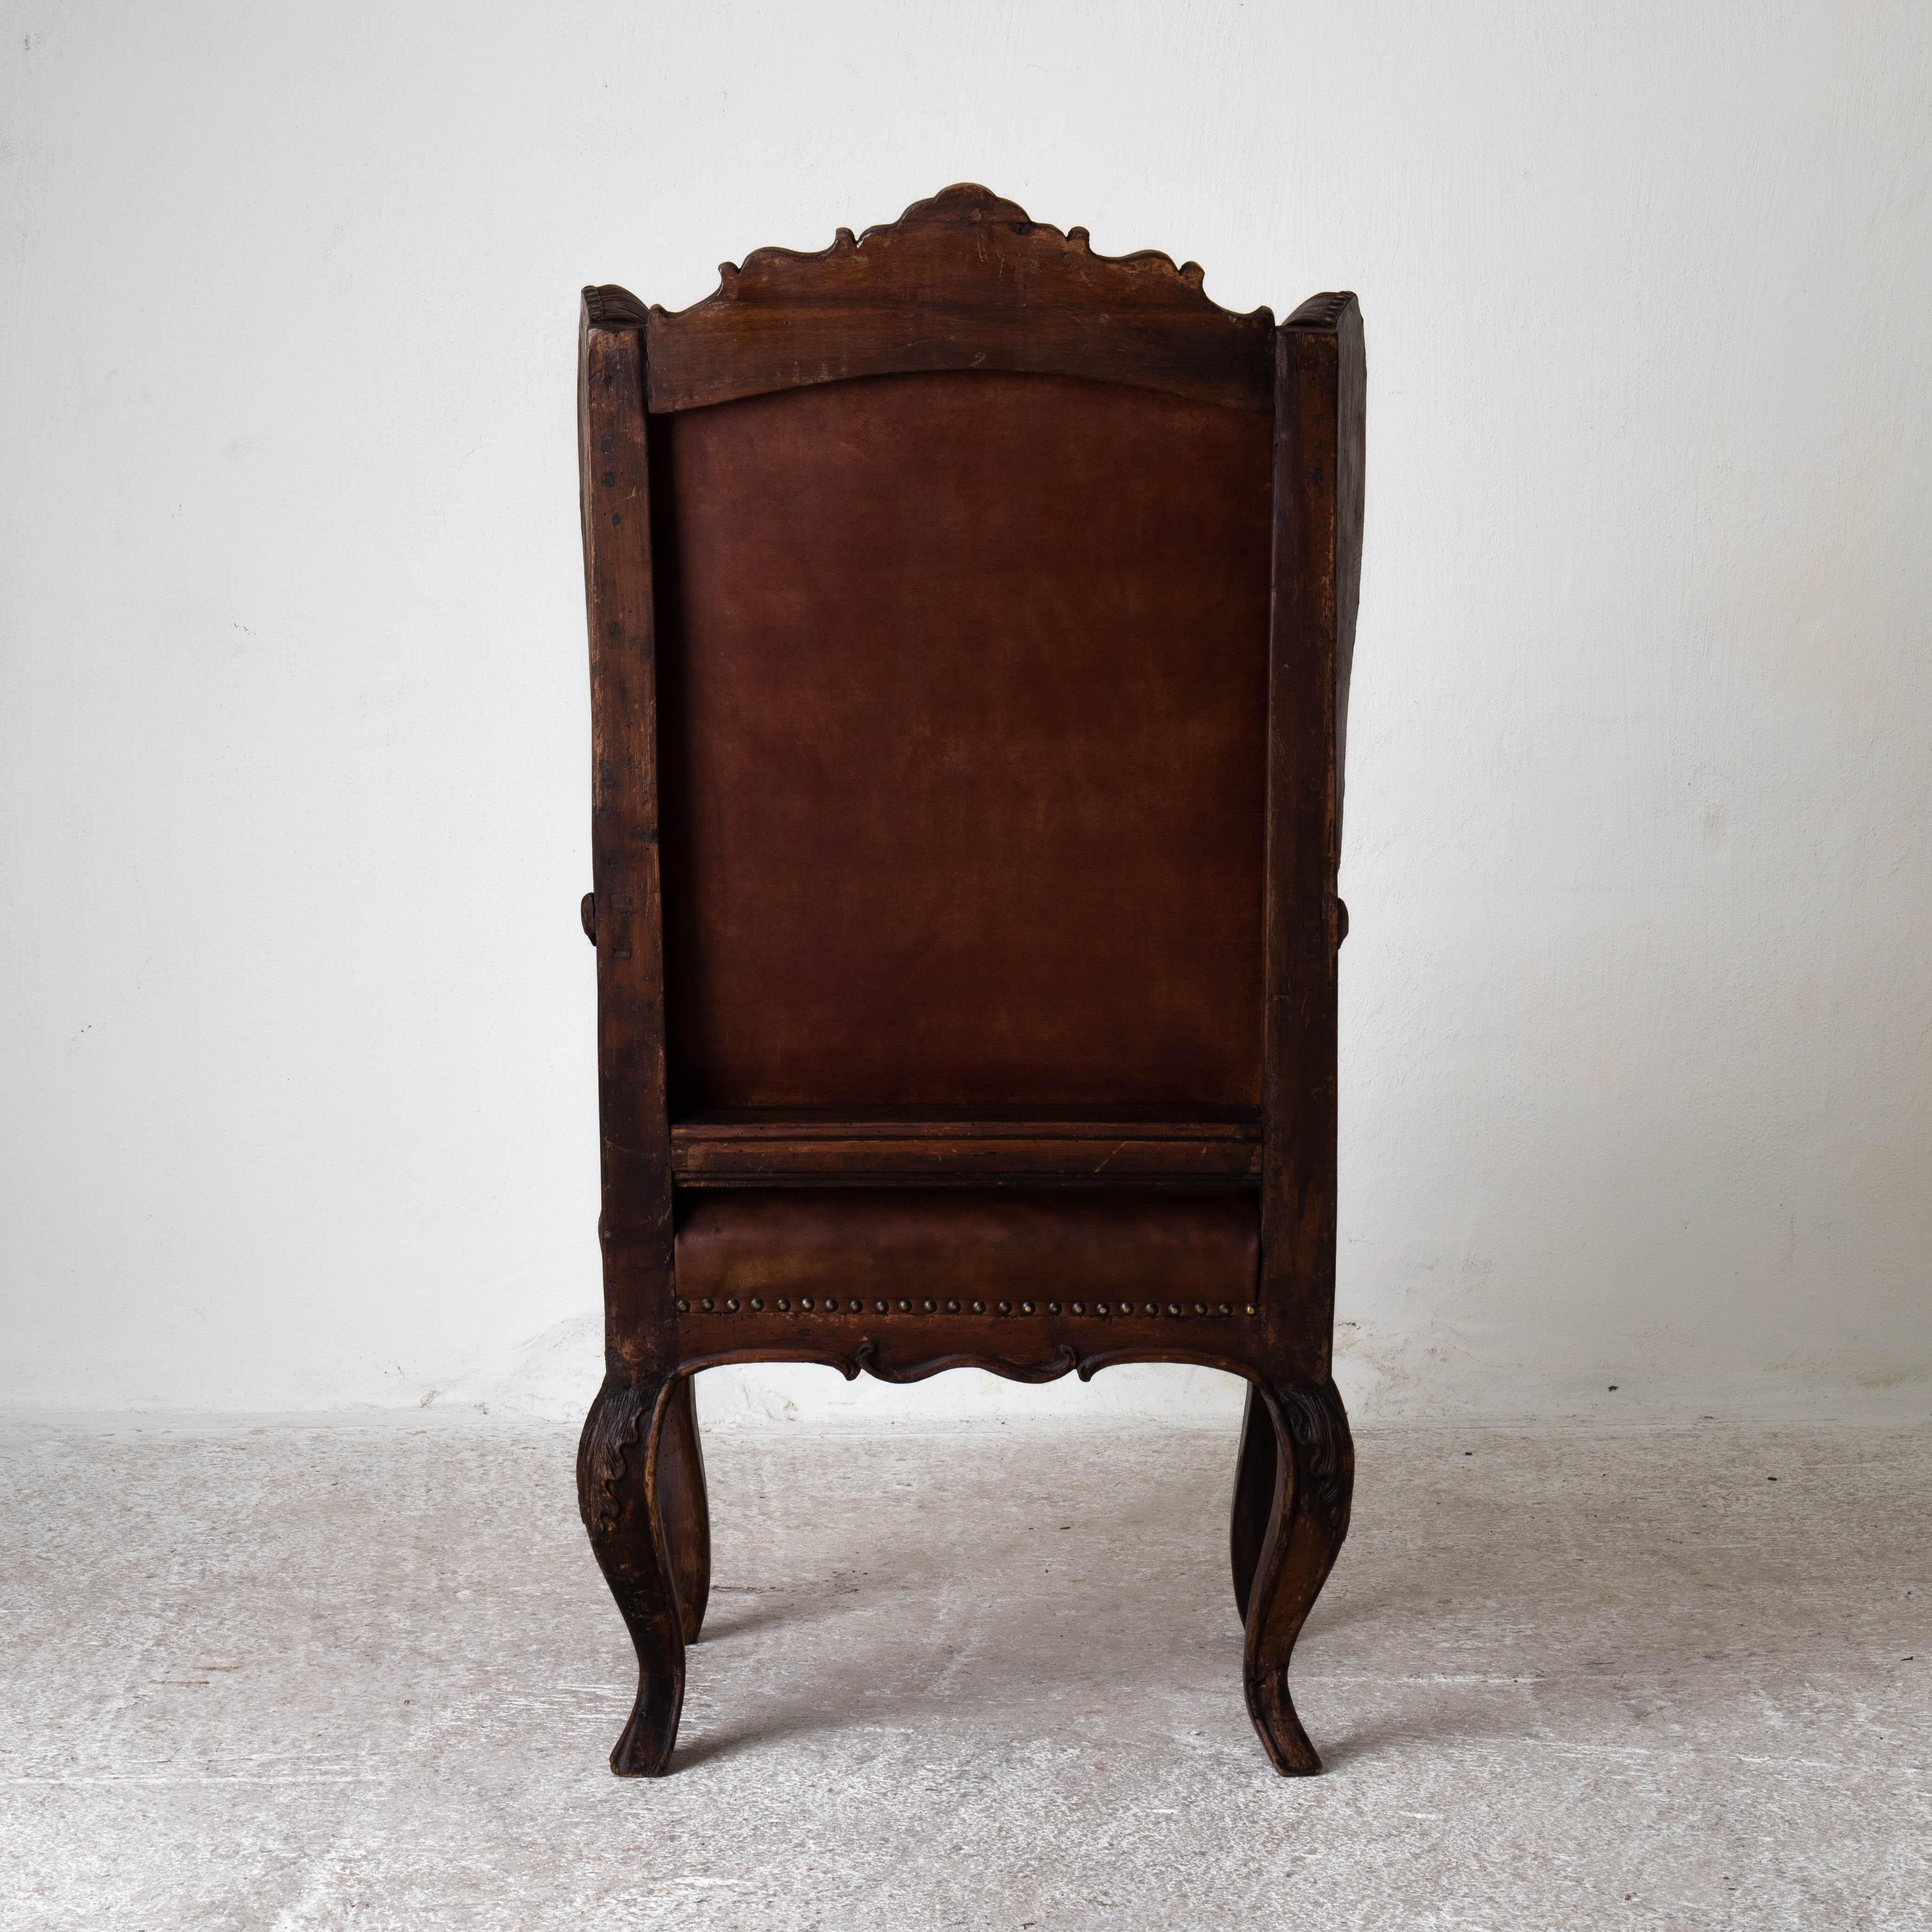 Chair Wingback Swedish Rococo Period 1750-1775 Brown Leather Sweden In Good Condition For Sale In New York, NY